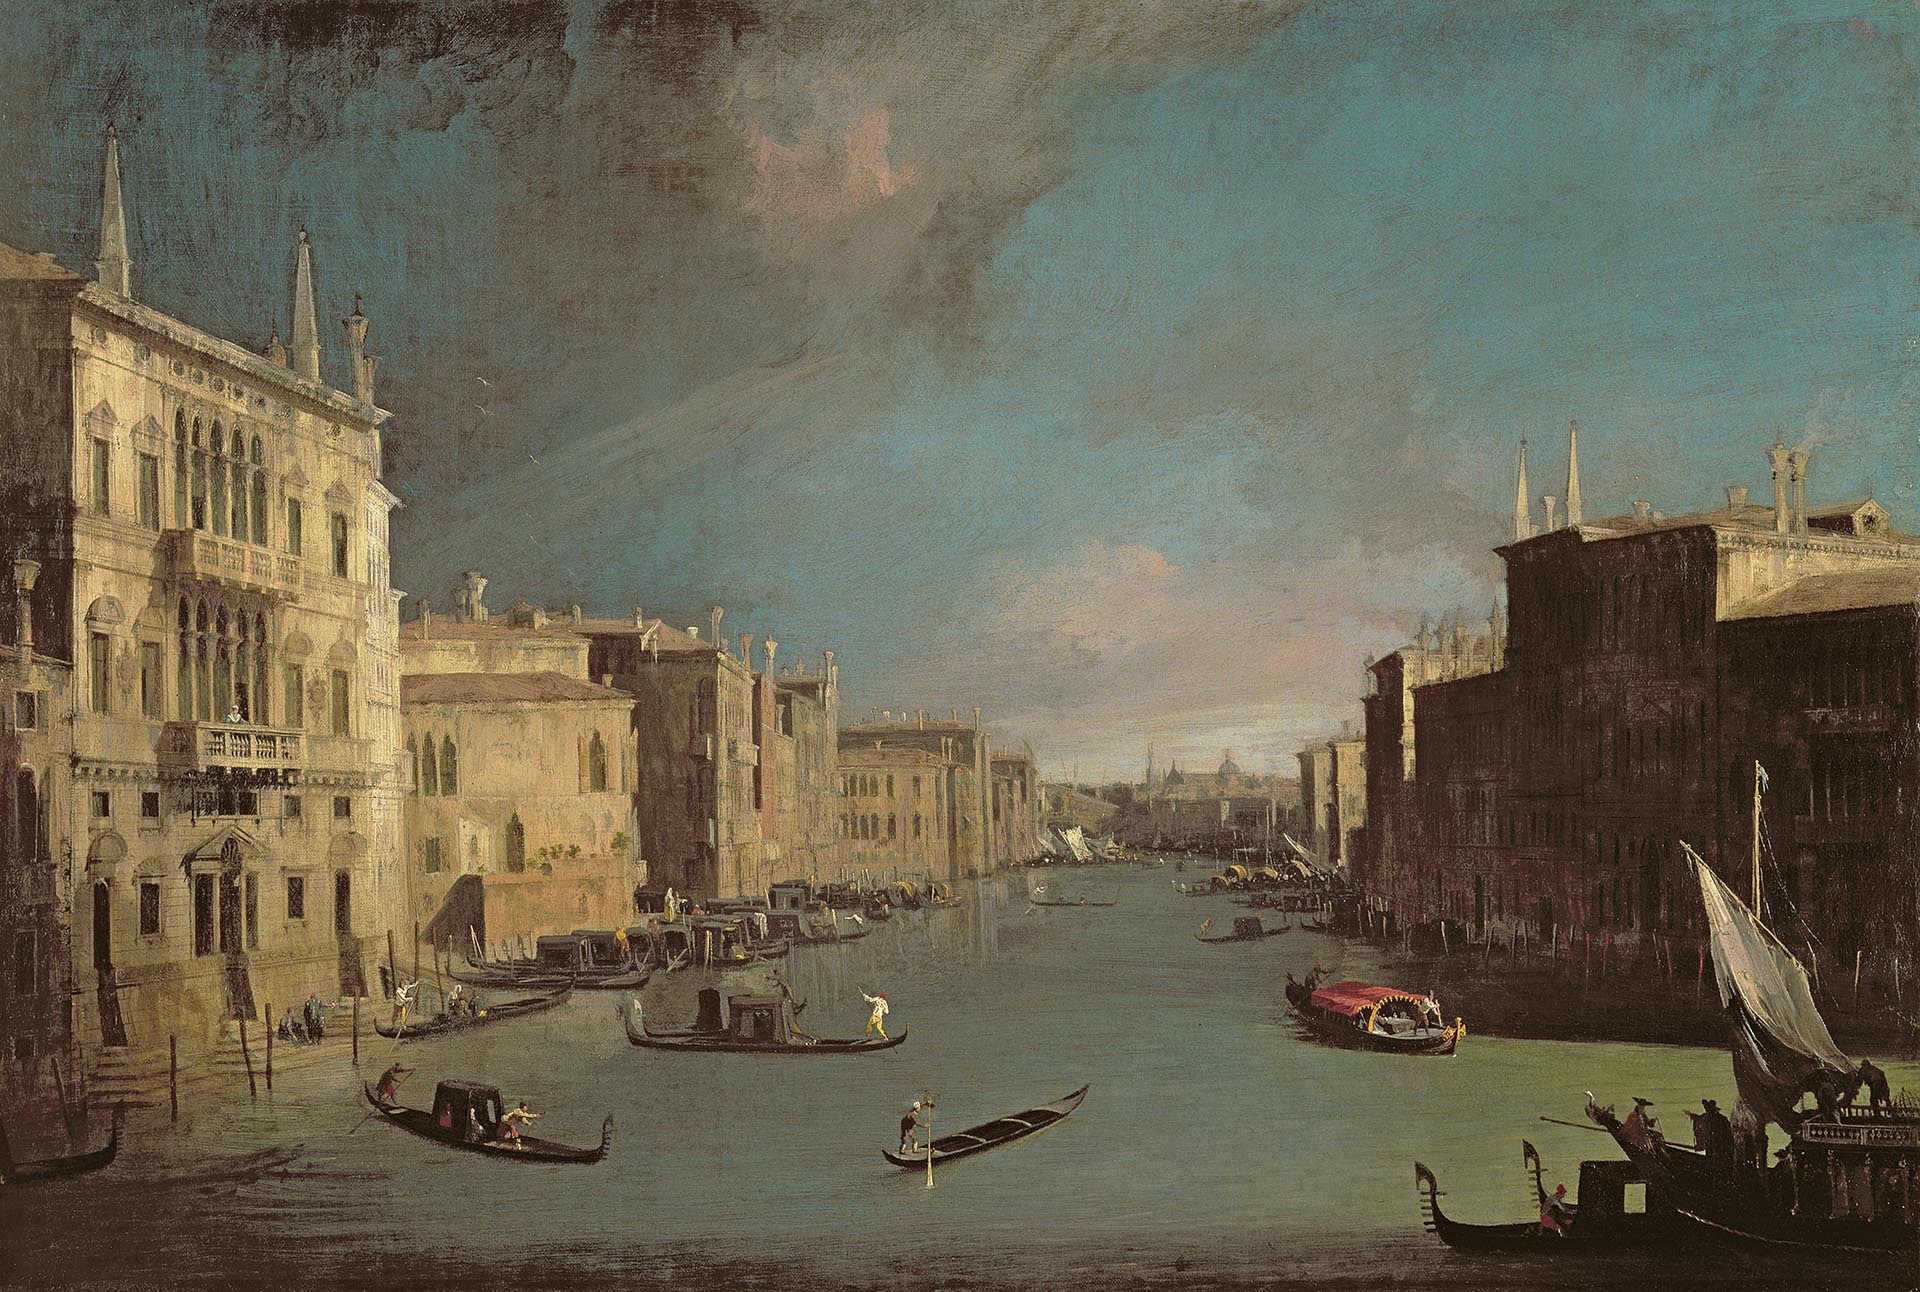 A painting of a canal in Venice. Buildings line the canal and there are boats on the water